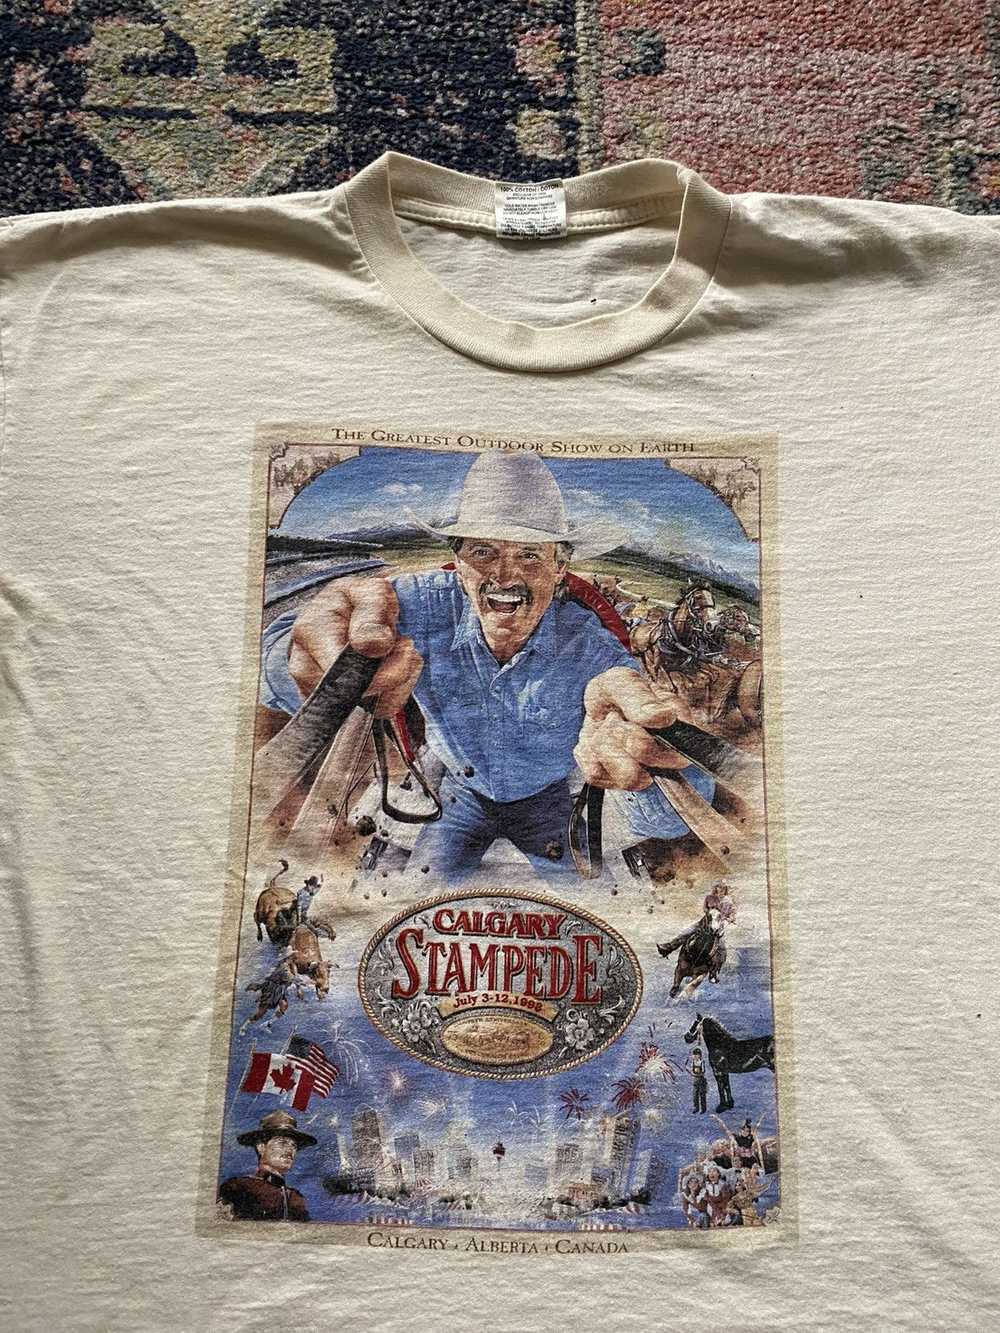 Vintage vintage 90’s Calgary rodeo t shirt - image 2